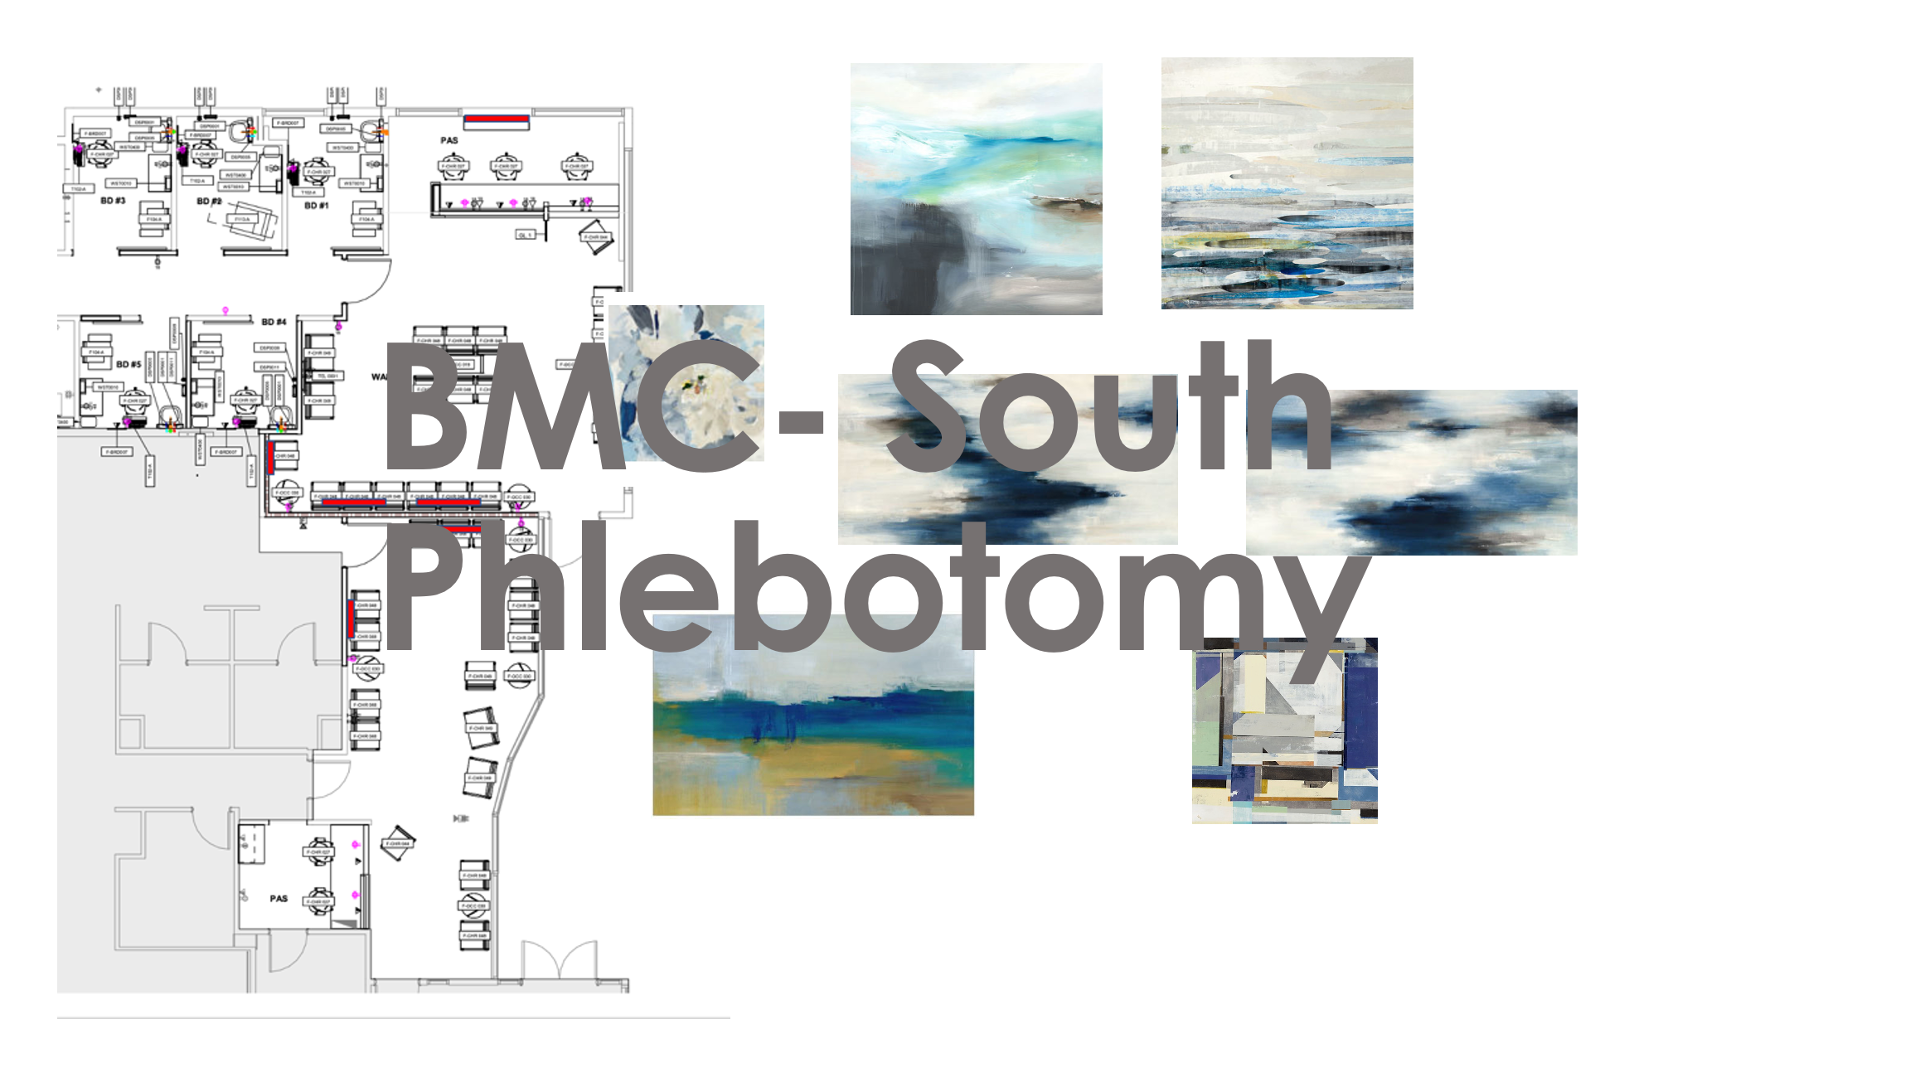 BMC- S Phlebotomy WR and rooms-6 canvas prints-5 bays=16 pieces total by Printwork